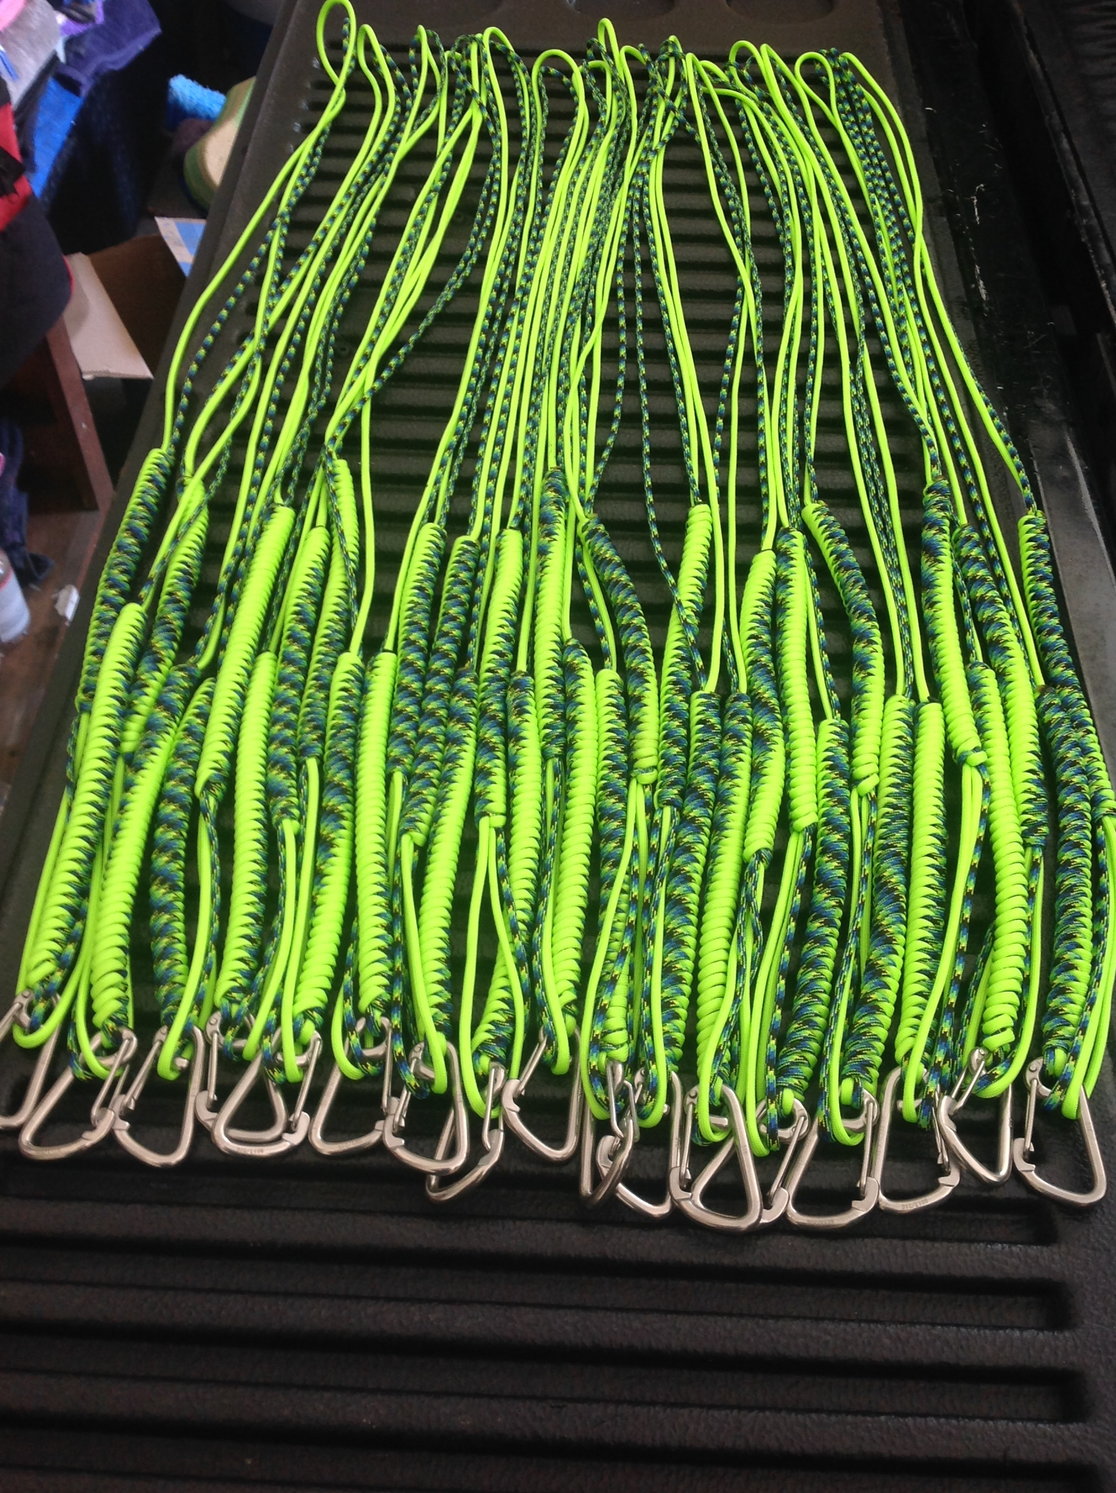 Rod leashes 6' $16.99 each,shipping is free - The Hull Truth - Boating and  Fishing Forum